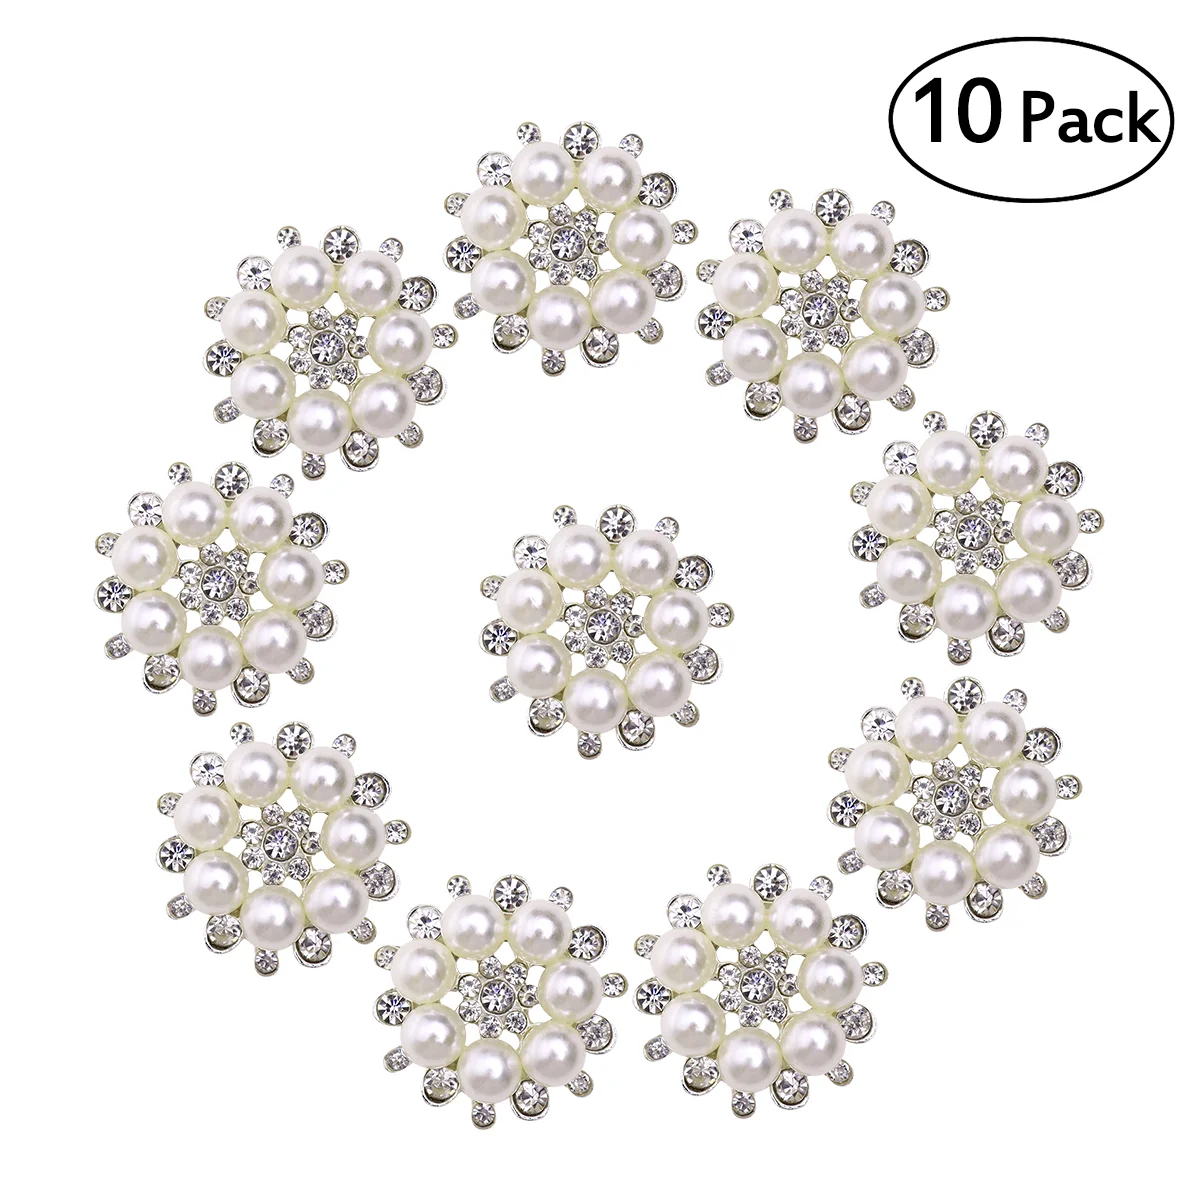 

ULTNICE 10pcs Faux Pearl Flower Buttons Embellishments for Craft (Silver)